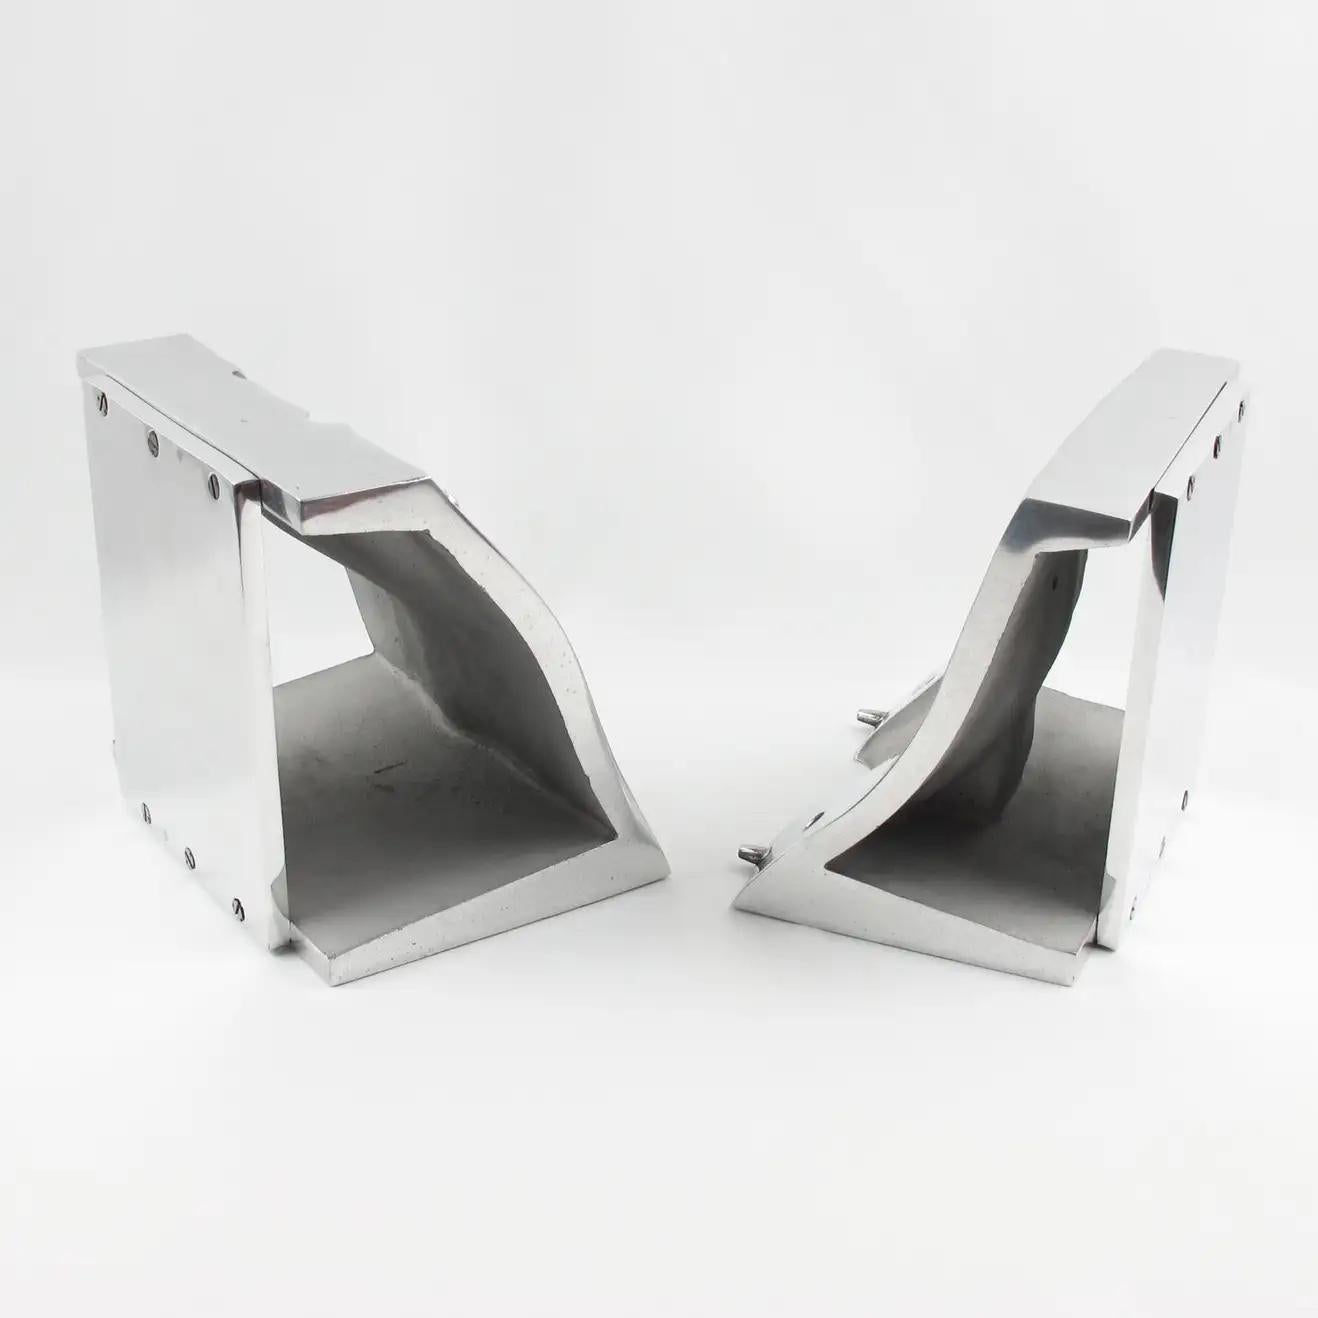 Industrial Stainless Steel Hand Mold Sculpture Bookends, a Pair For Sale 2